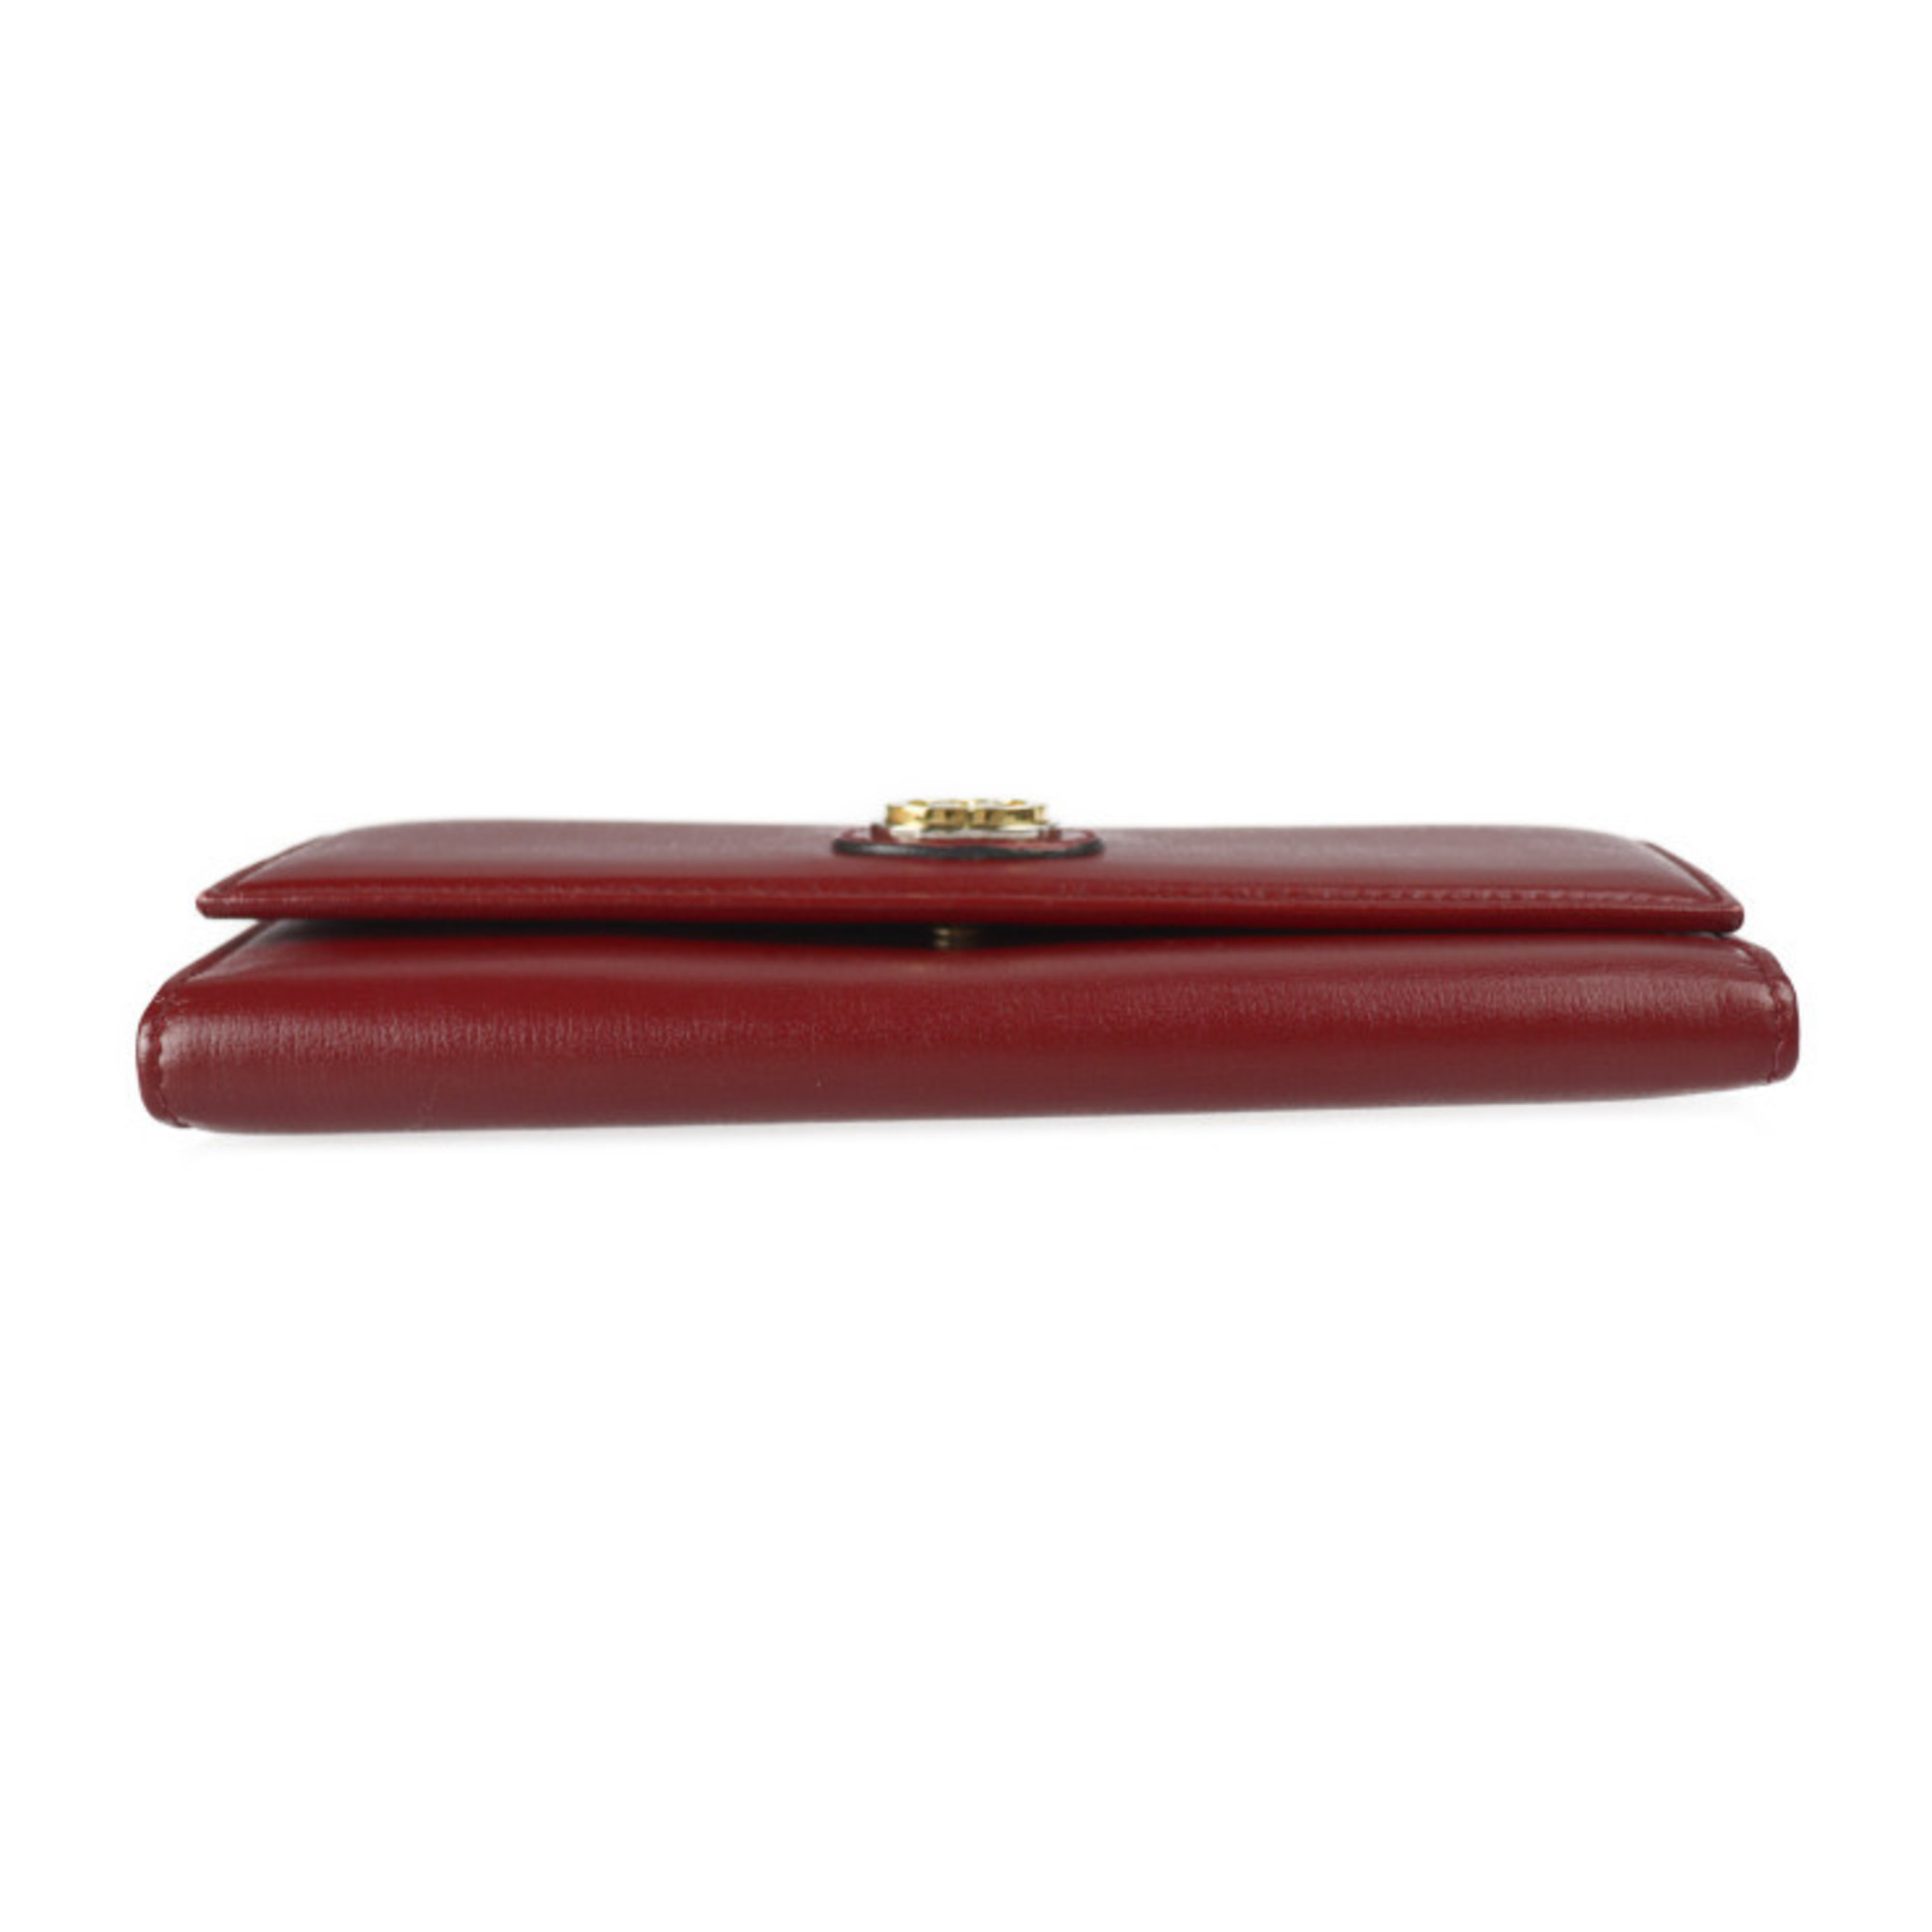 GUCCI Gucci Interlocking G Marina Bifold Wallet 598531 Leather Red Bordeaux Gold Hardware Long